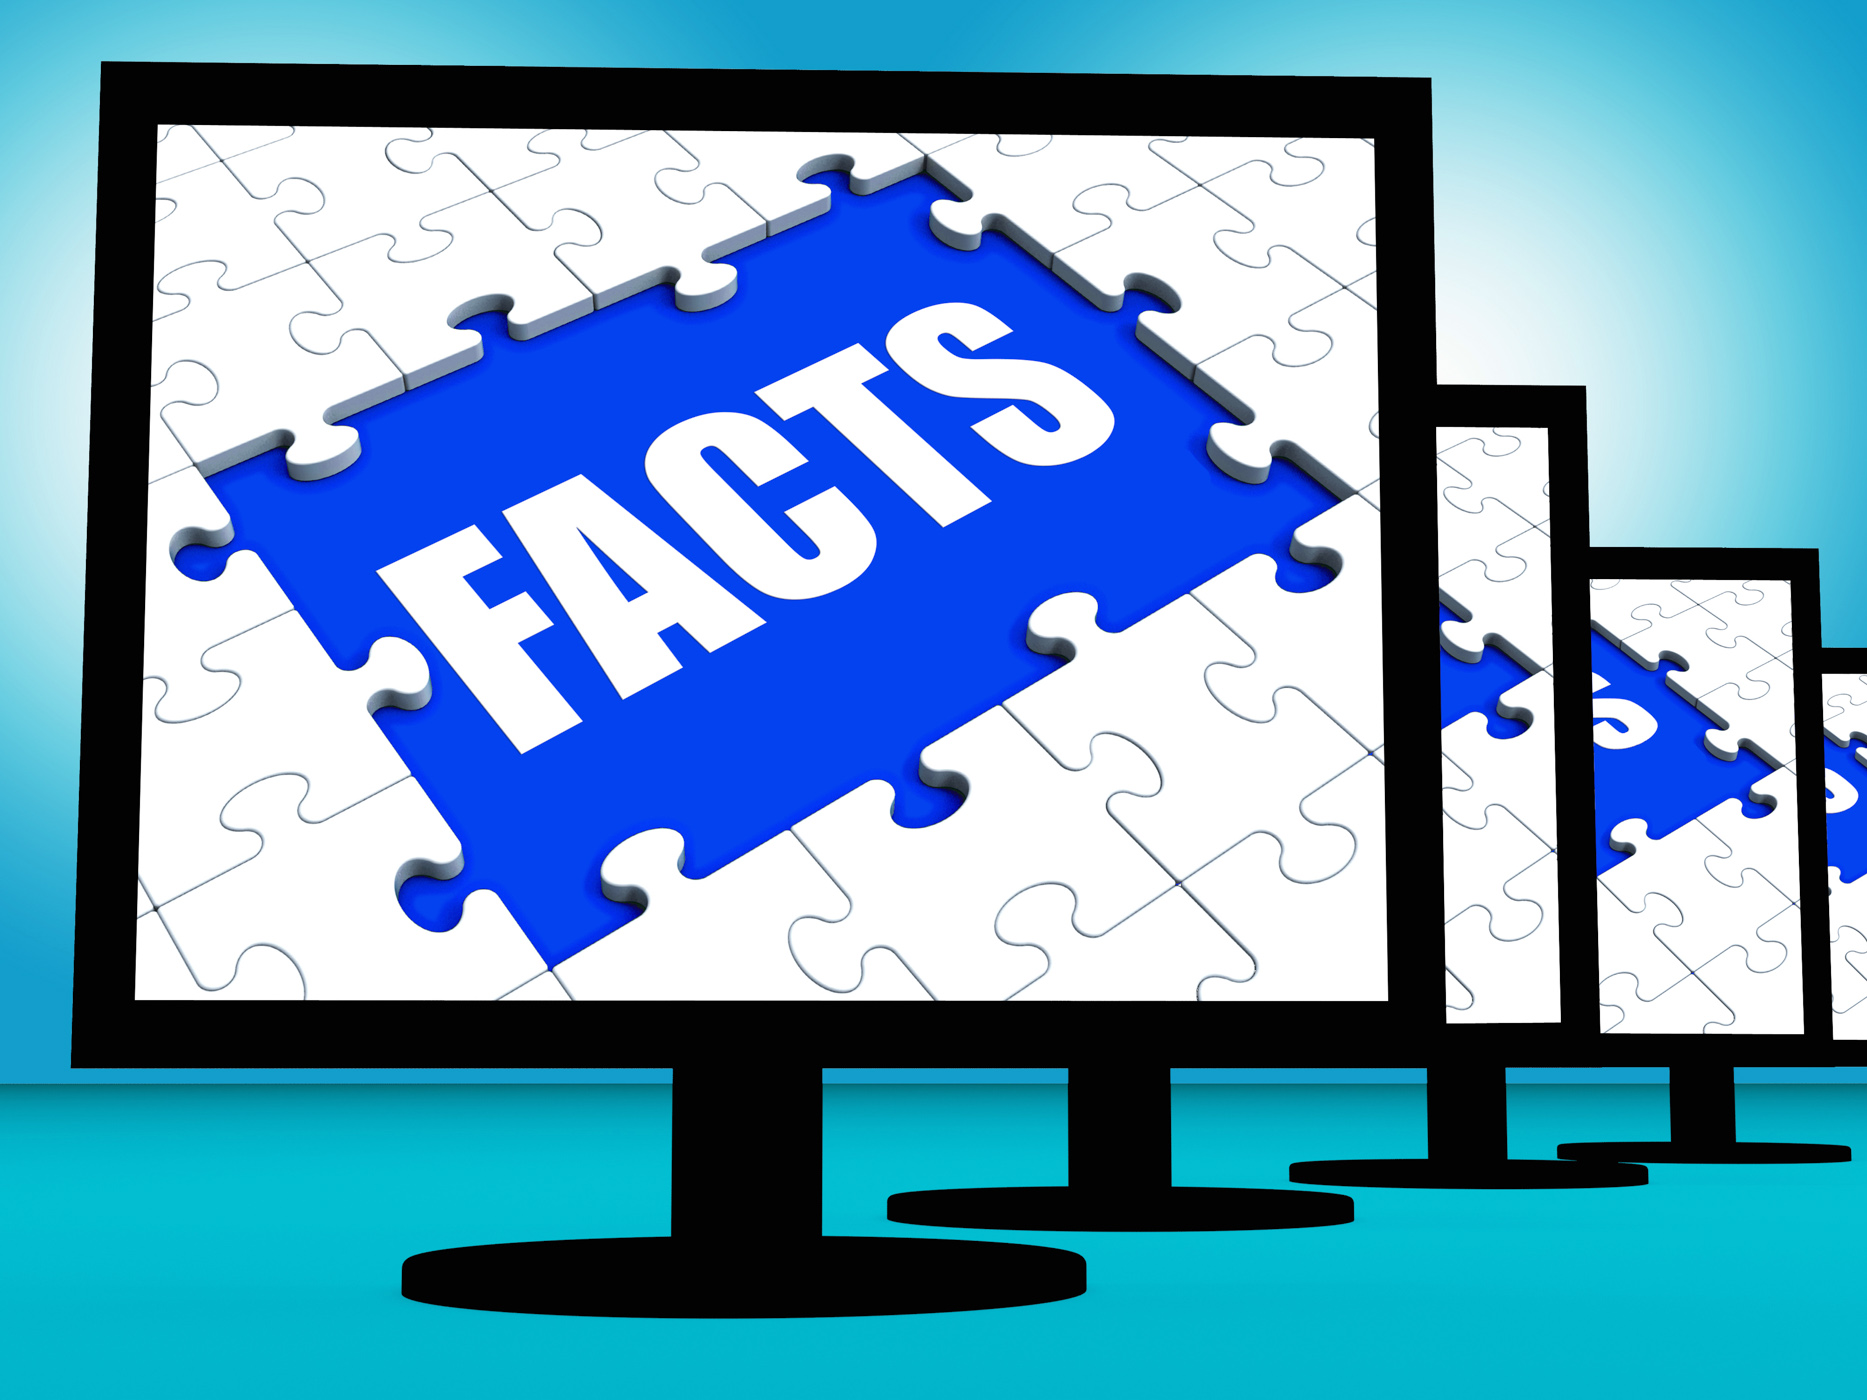 Facts monitors shows data information wisdom and knowledge photo